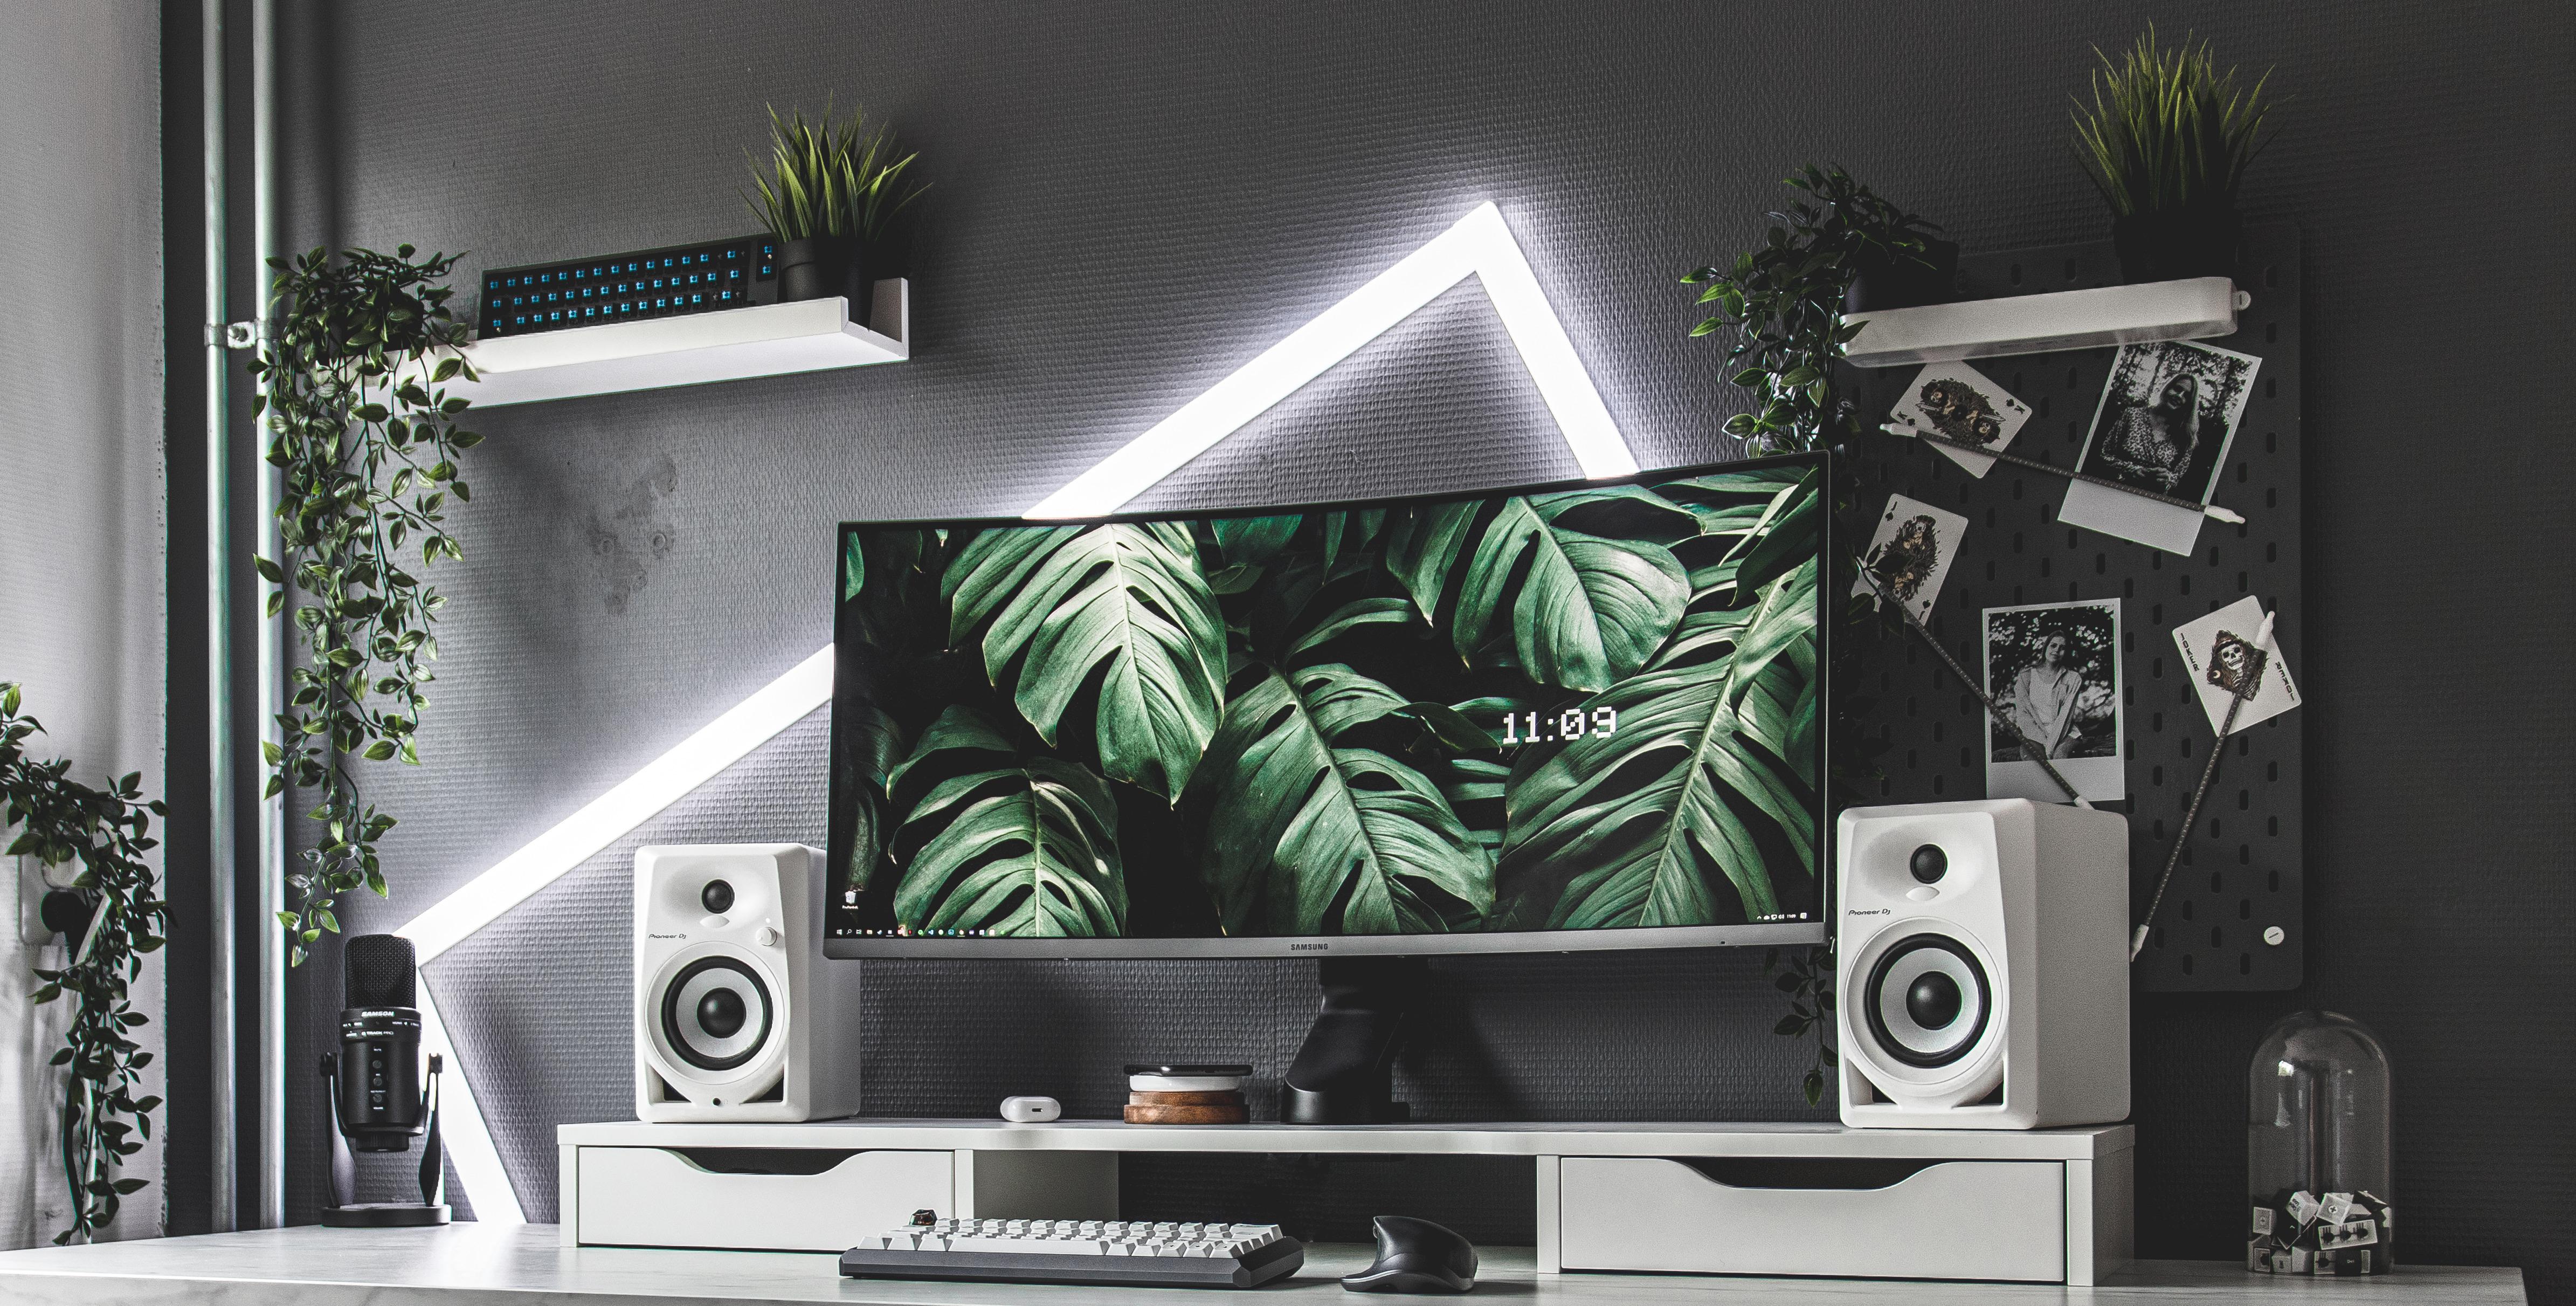 A sharp white-and-black desktop setup with green plants as accents and a monitor desktop showing green plant fronds.